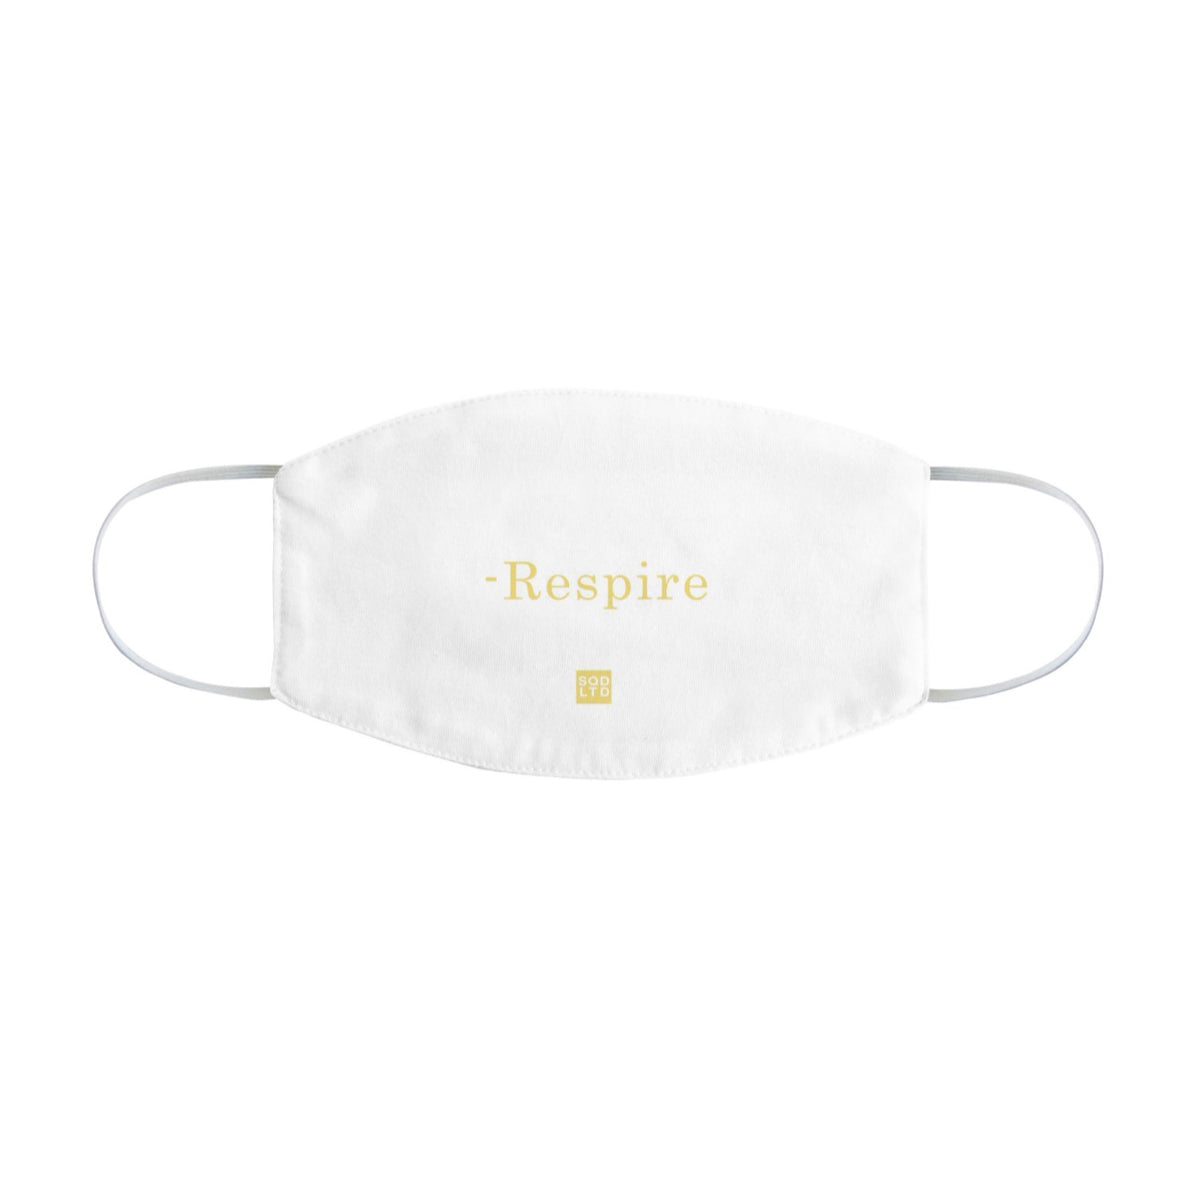 Respire Face Mask W by Squared Limited